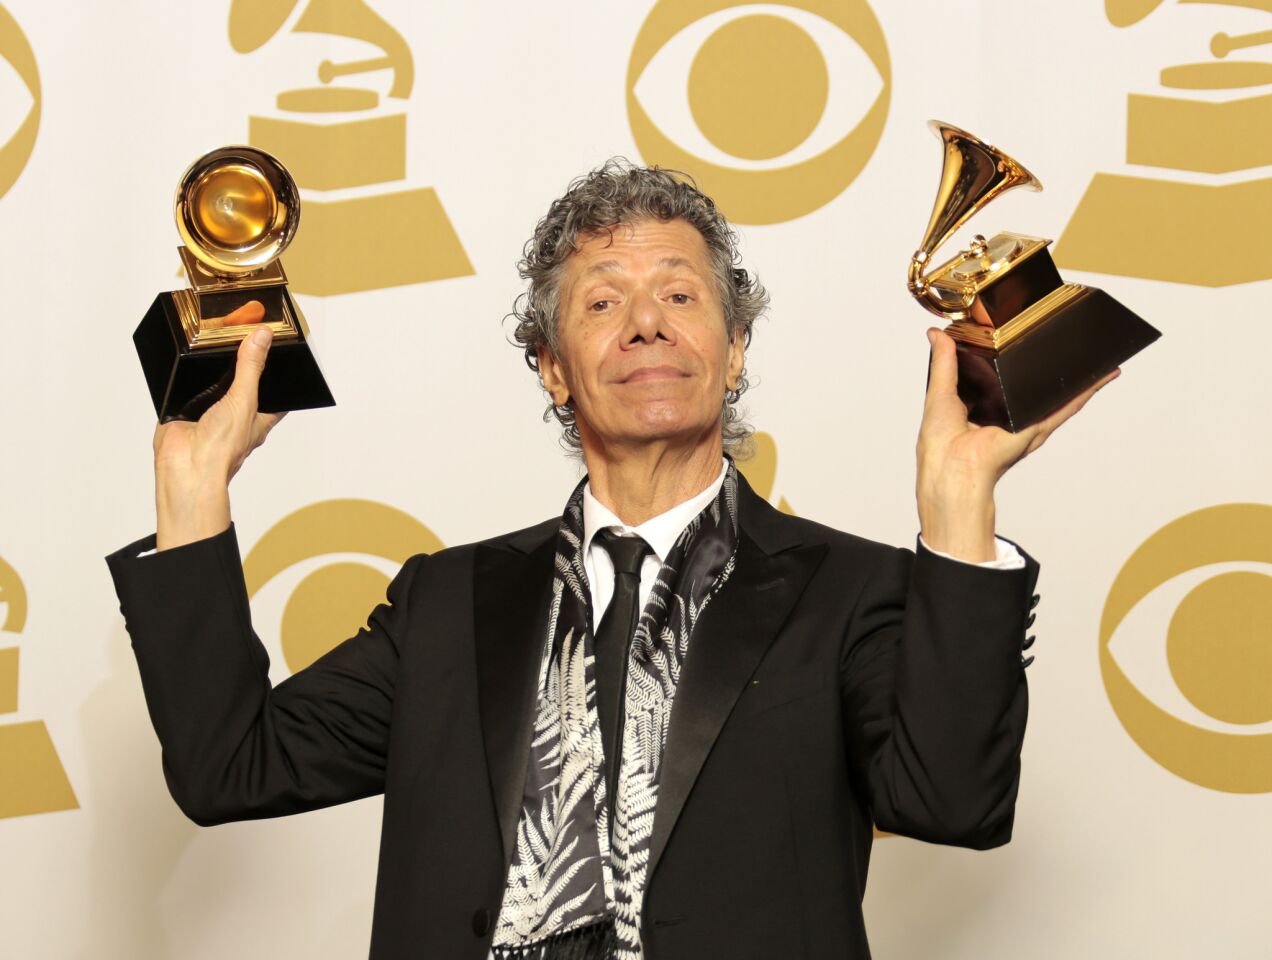 Chick Corea holds the Grammys he won for improvised jazz solo and jazz insturmental album.